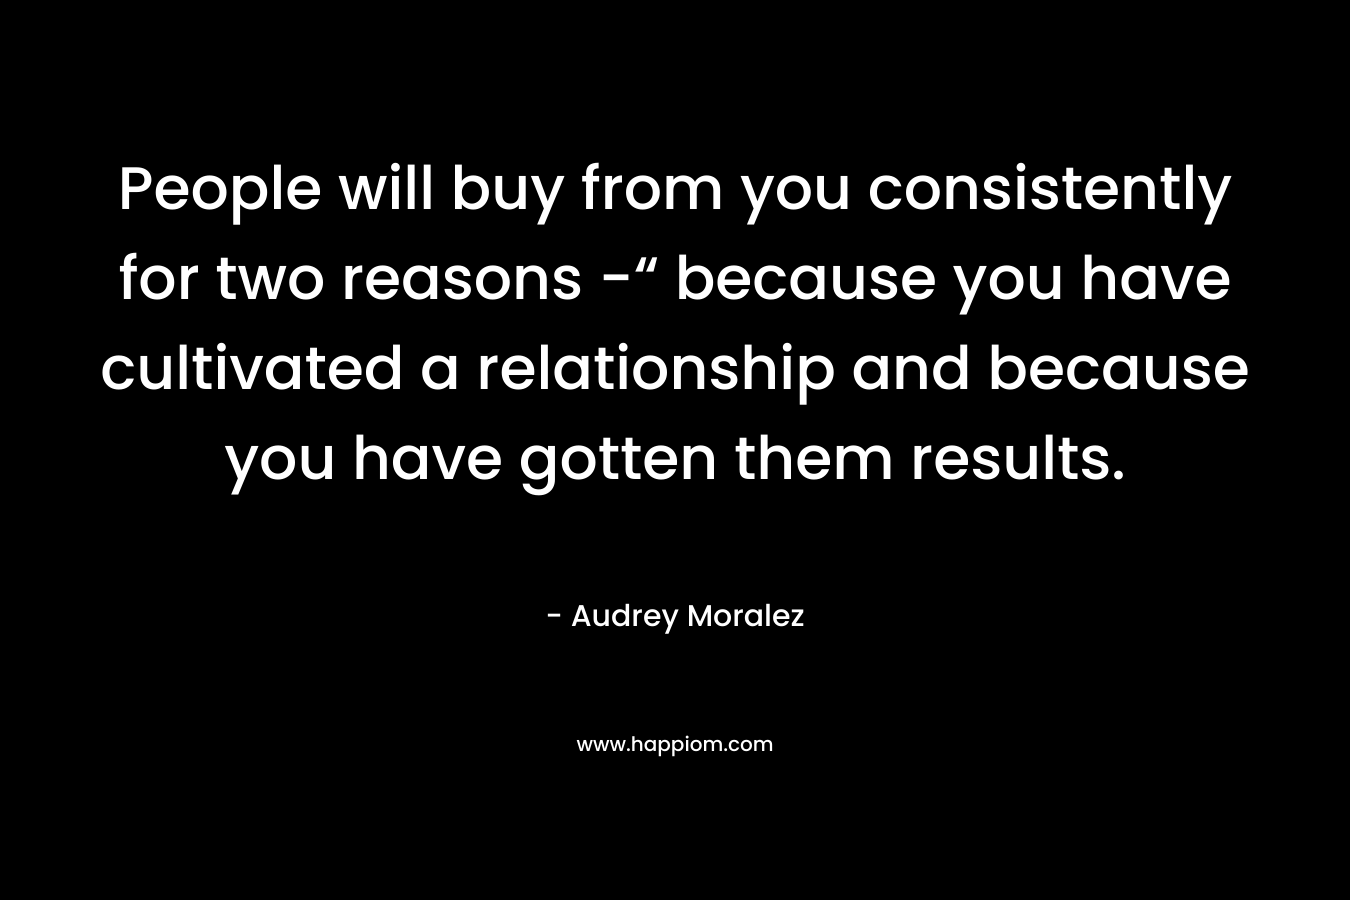 People will buy from you consistently for two reasons -“ because you have cultivated a relationship and because you have gotten them results.